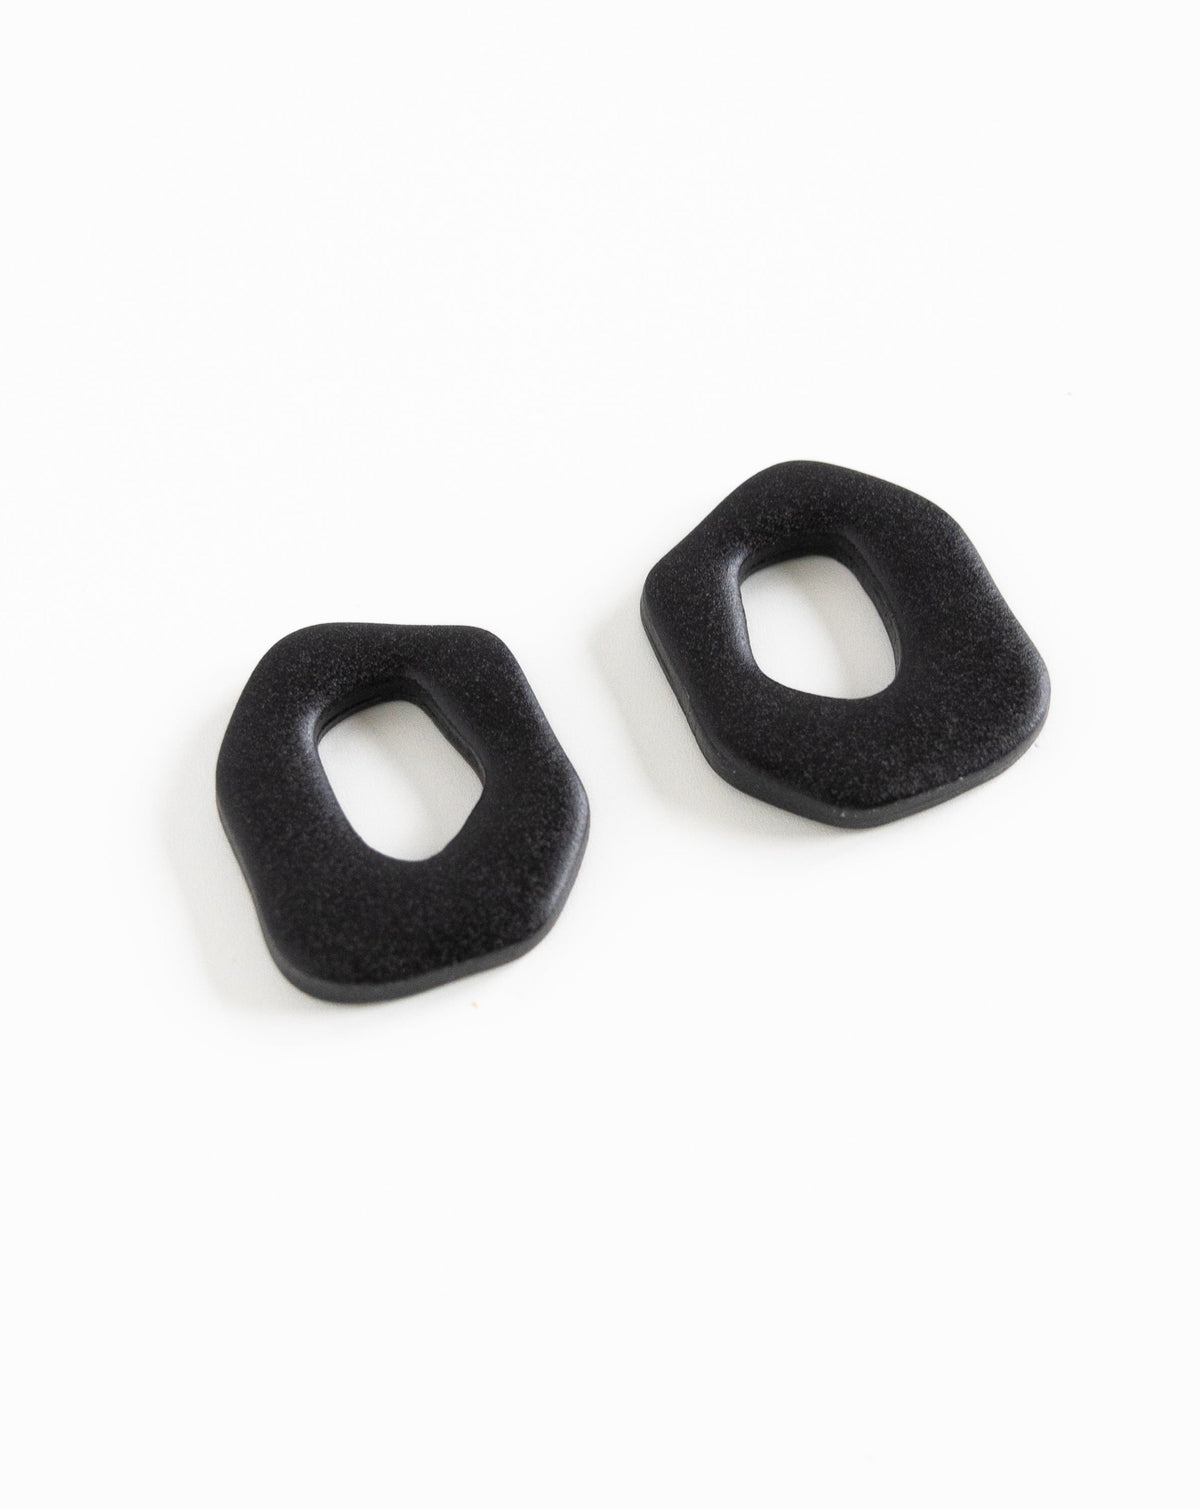 Angled view of Darien Beads in Black color